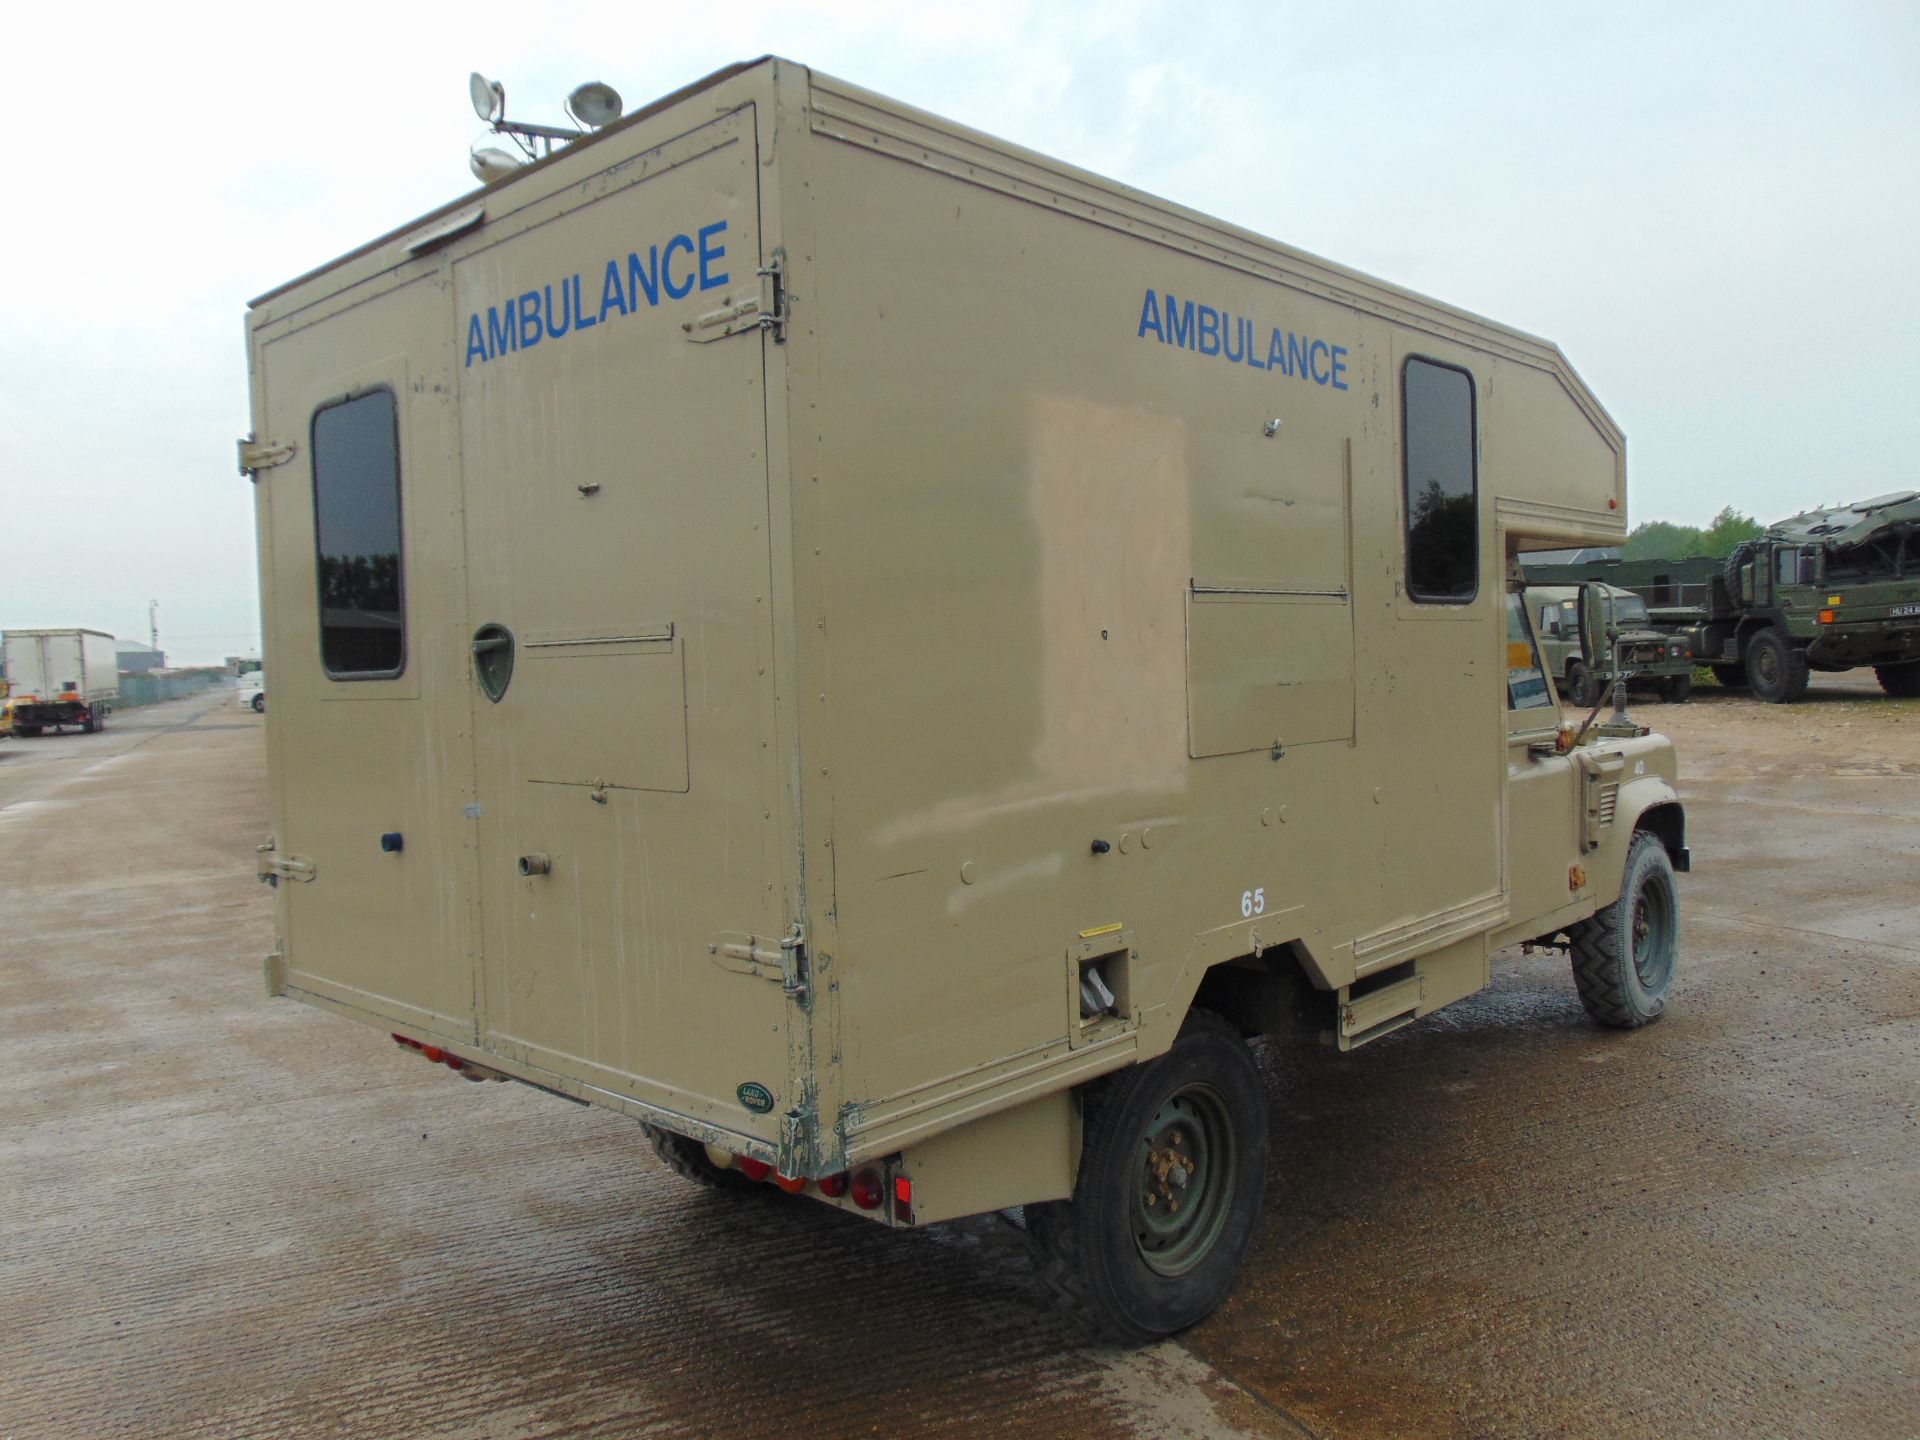 Military Specification Land Rover Wolf 130 ambulance - Image 8 of 18